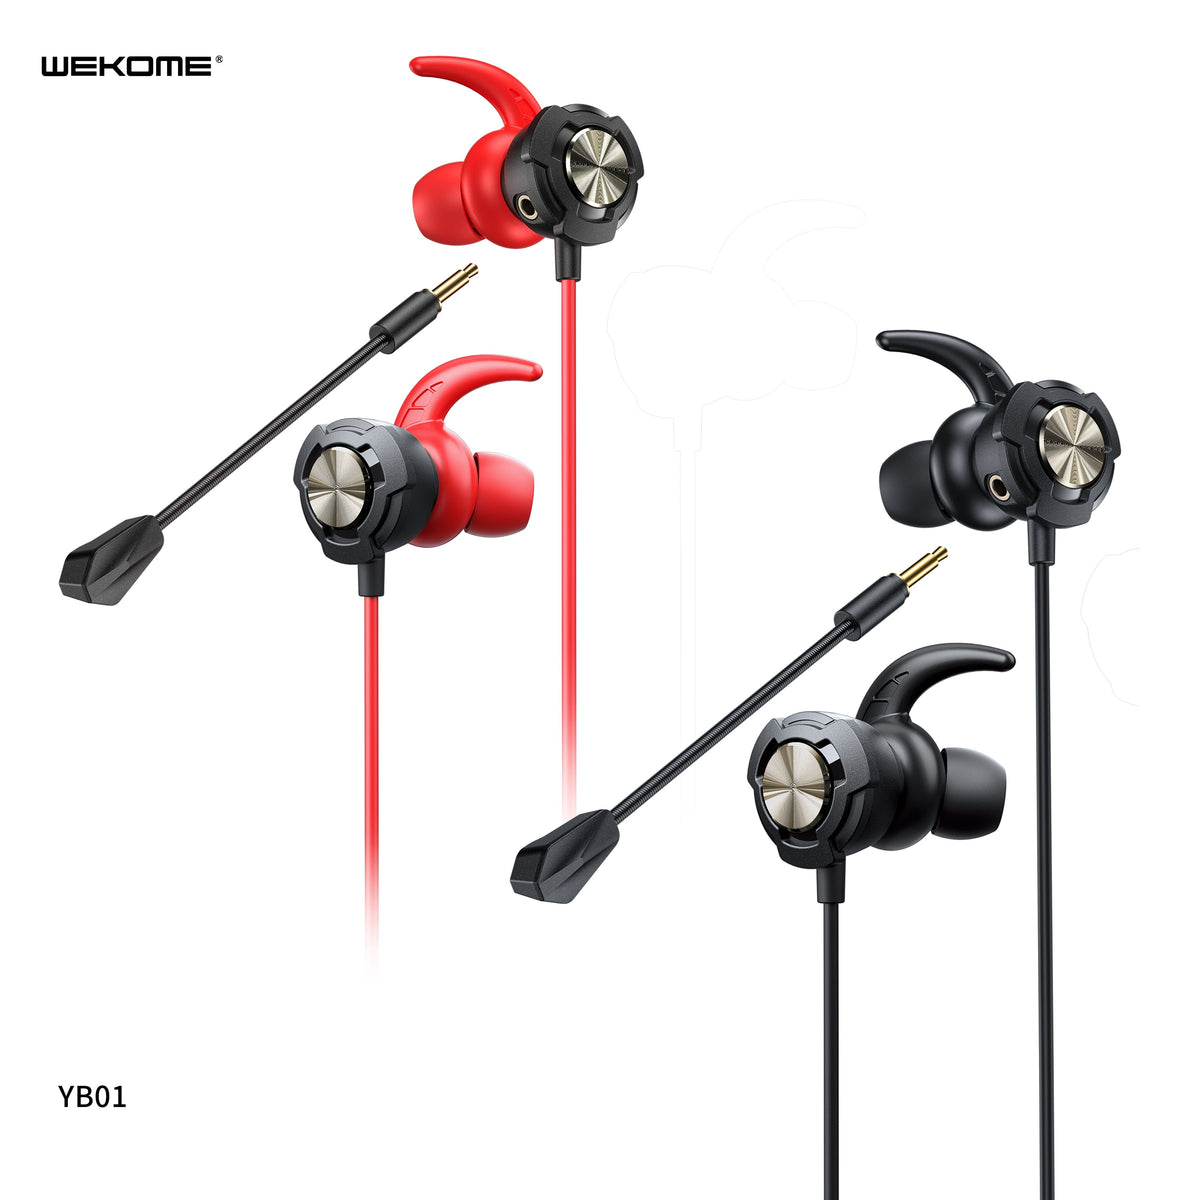 WEKOME YB01 RAIDERS GAMING SERIES IN EAR (WIRED) EARPHONE FOR GAMES WITH MIC - Red